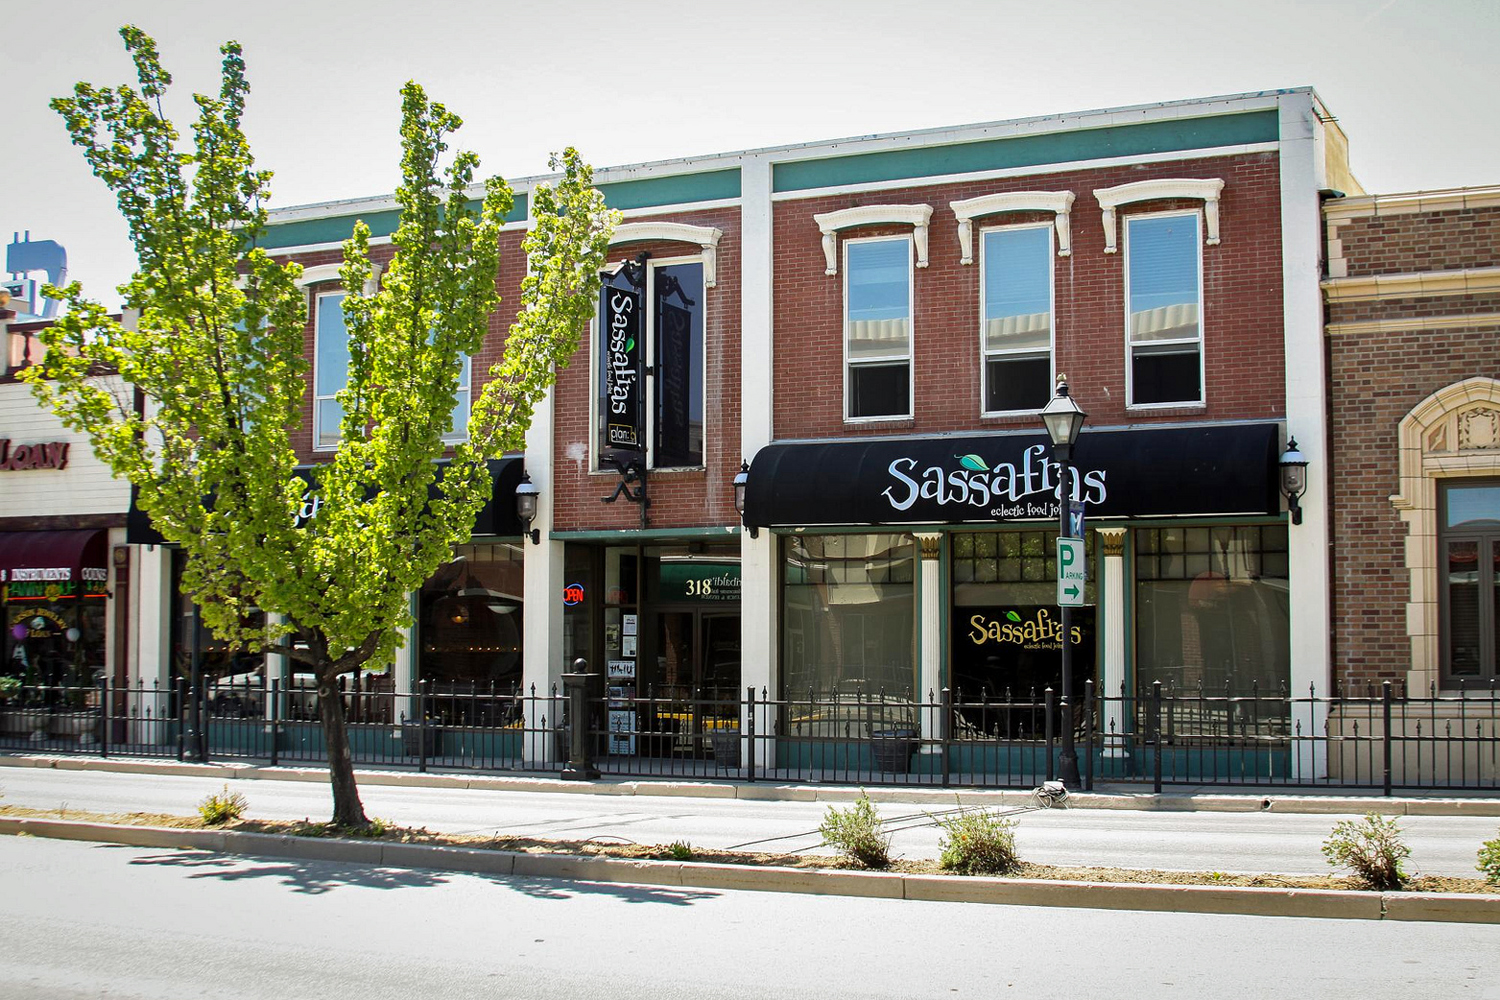 The Sassafras restaurant seen in the renovated downtown of Carson City, Nev. (Courtesy Carson City Downtown 20/20)